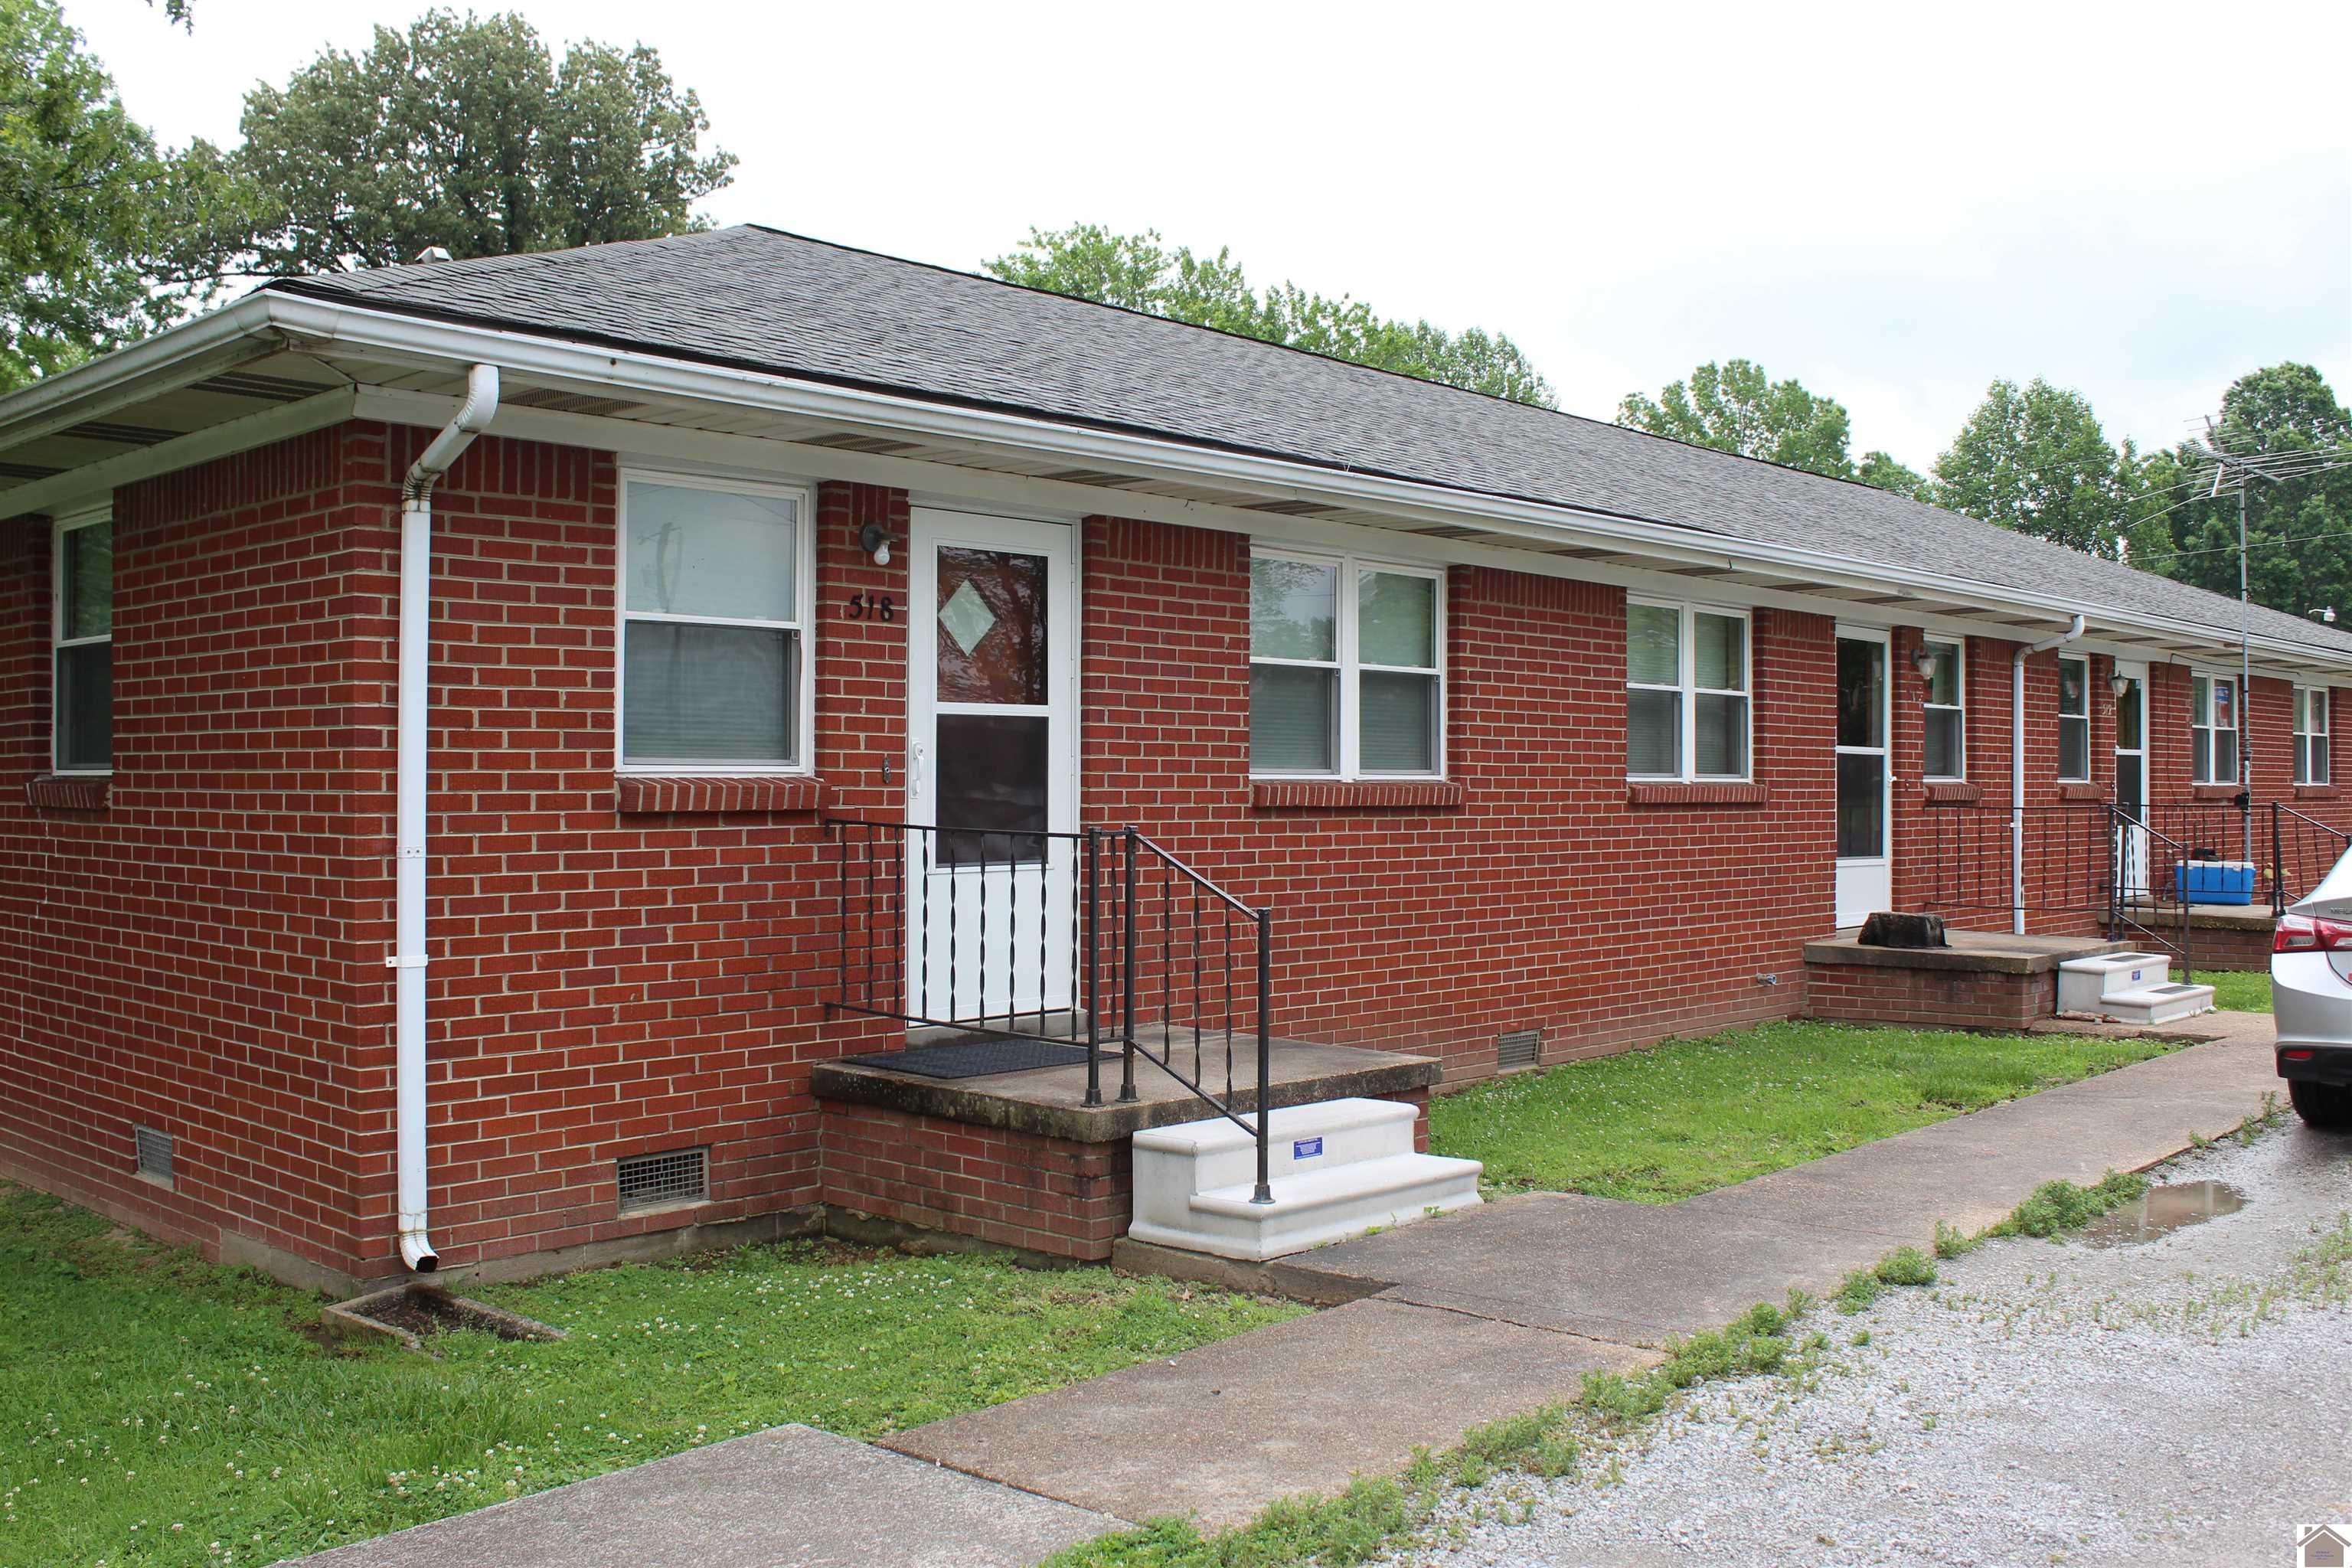 106-130 East 5th, LaCenter, KY 42056 Listing Photo  8